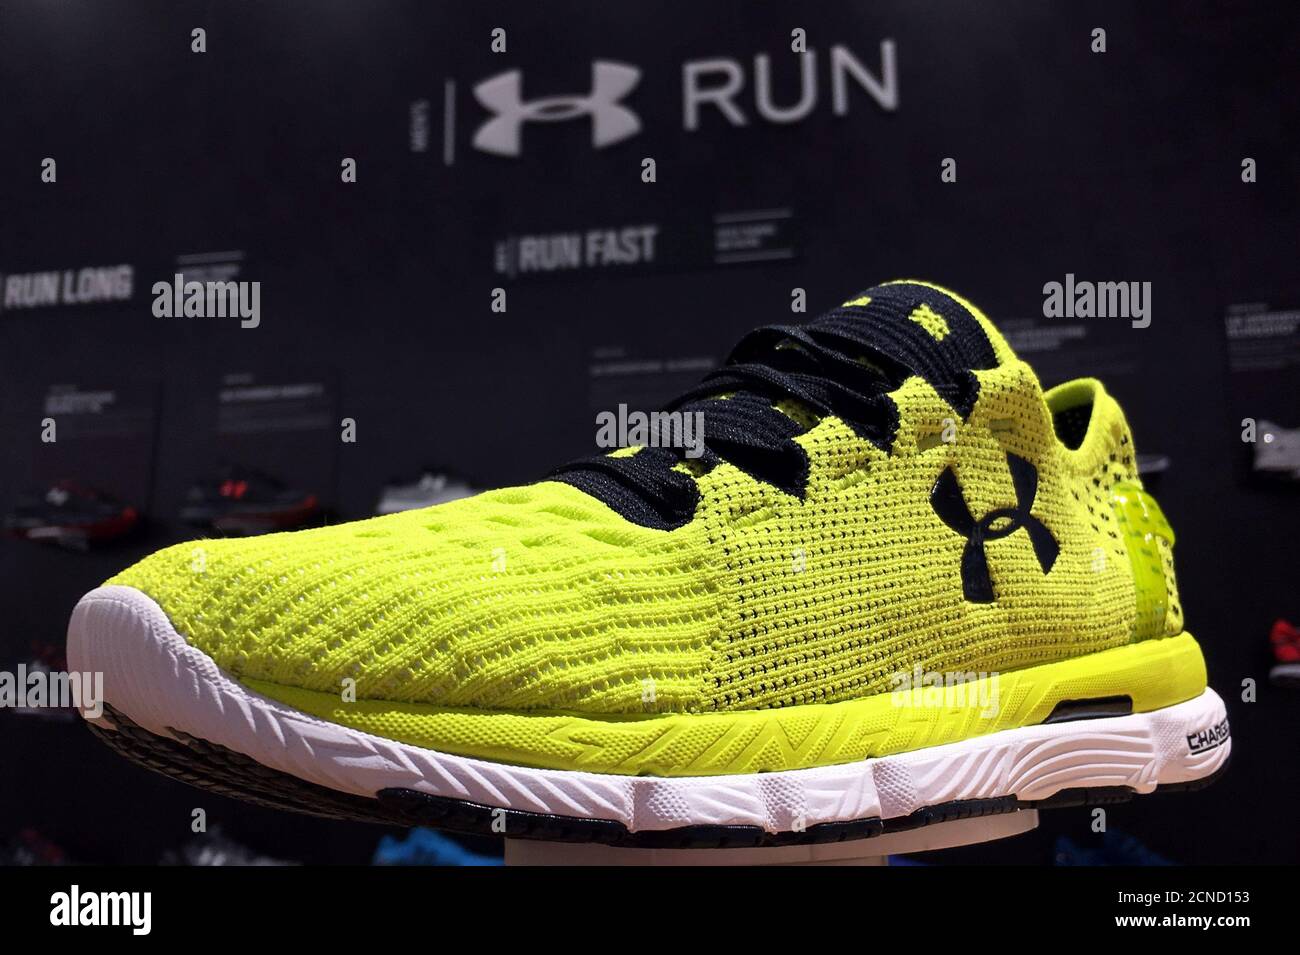 A running shoe is seen on display at an Under Armour store in Chicago,  Illinois, U.S., October 25, 2016. REUTERS/Jim Young Stock Photo - Alamy